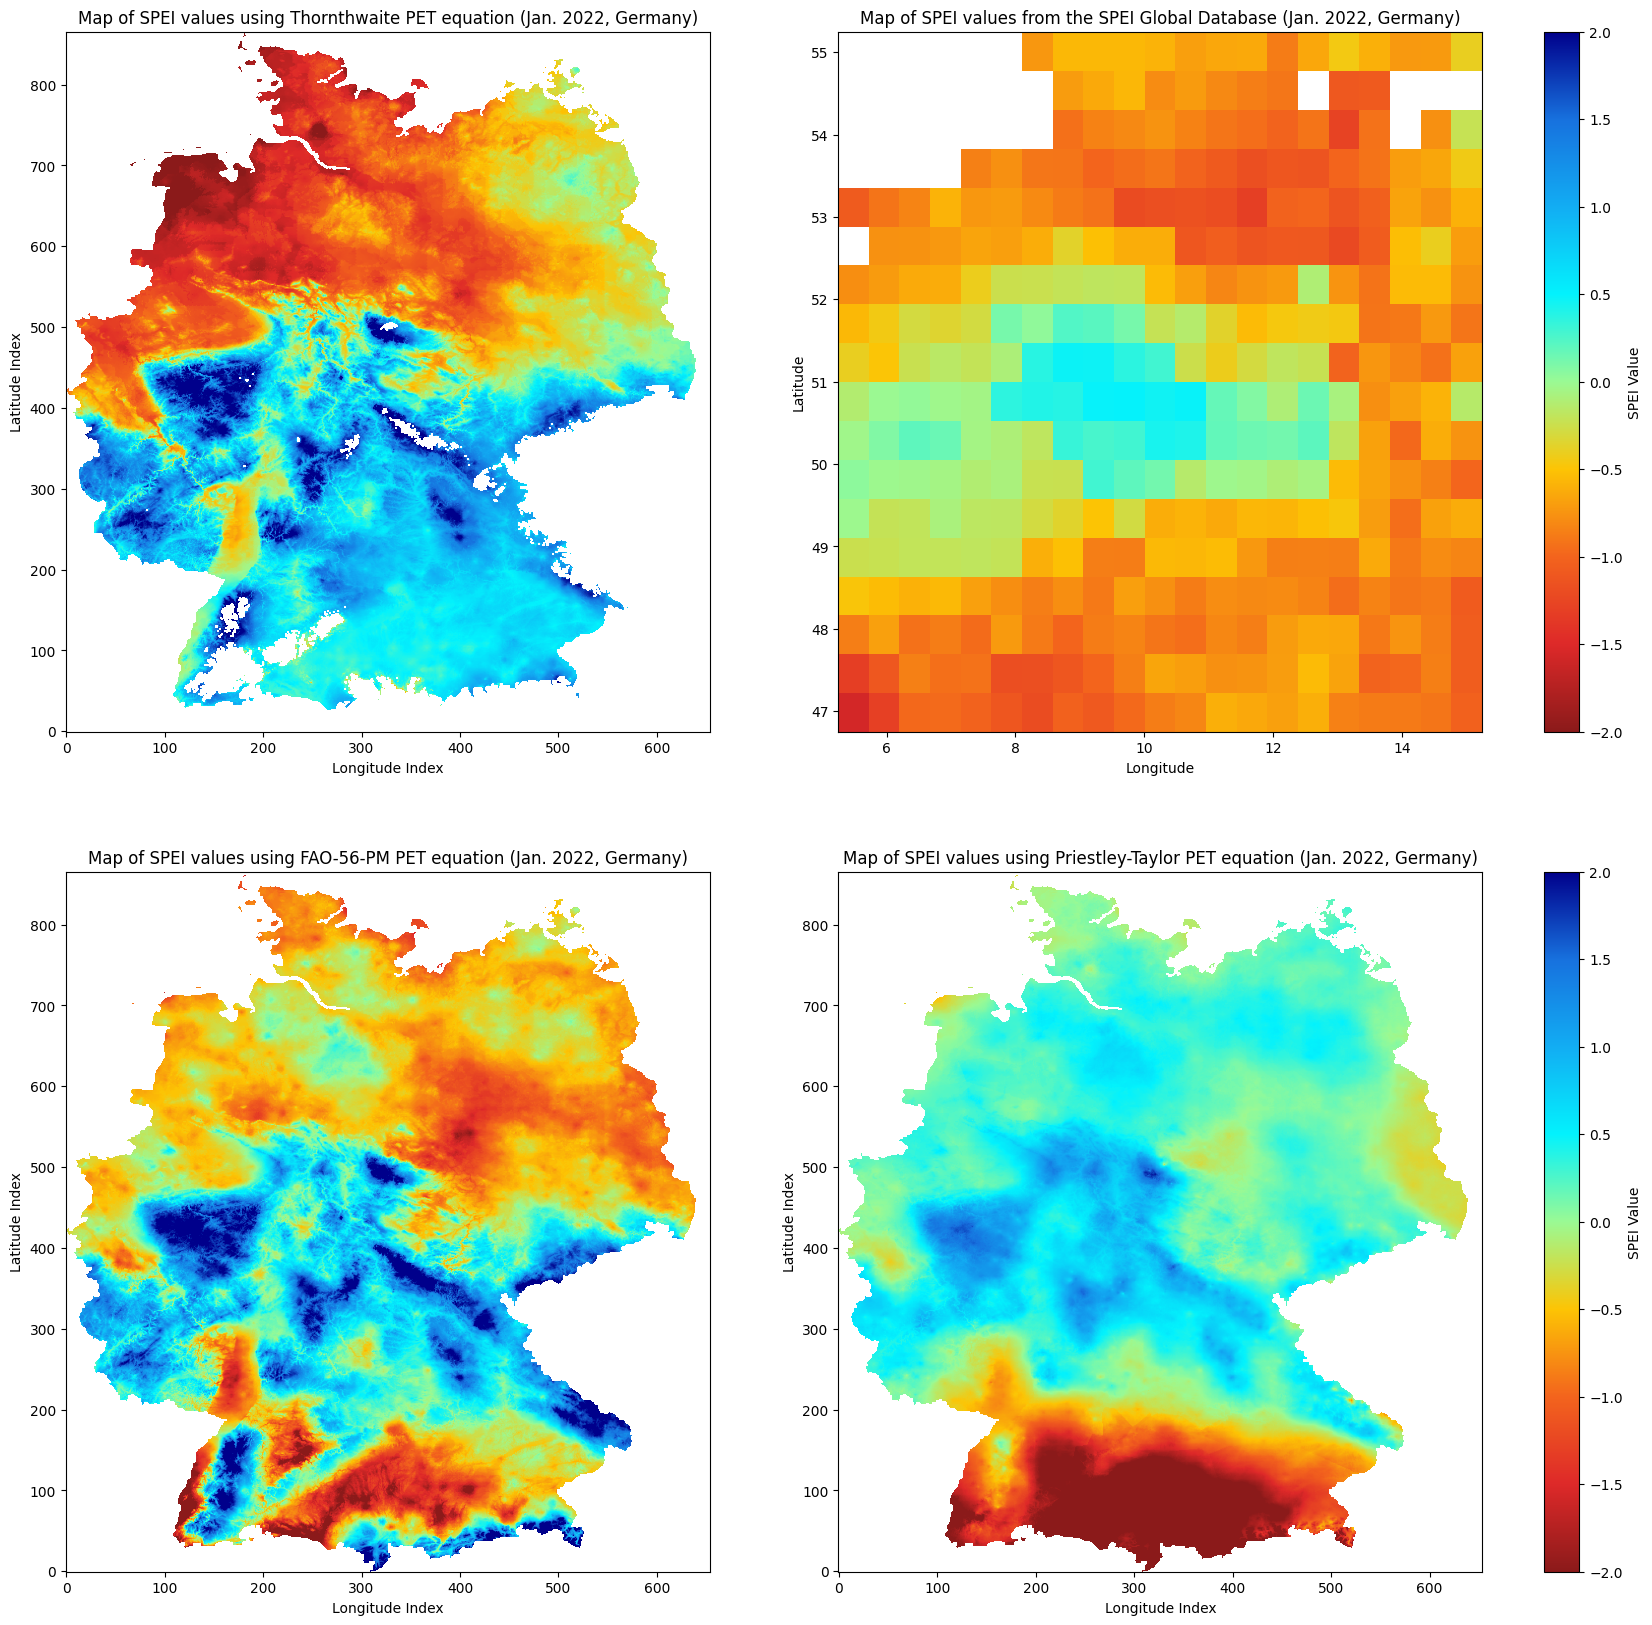 Visual comparison between the Thornthwaite, FAO-56-Penman-Monteith, Priestley-Taylor and Global SPEI Database plot results which have been calculated using meteorological weather stations's data from the DWD.